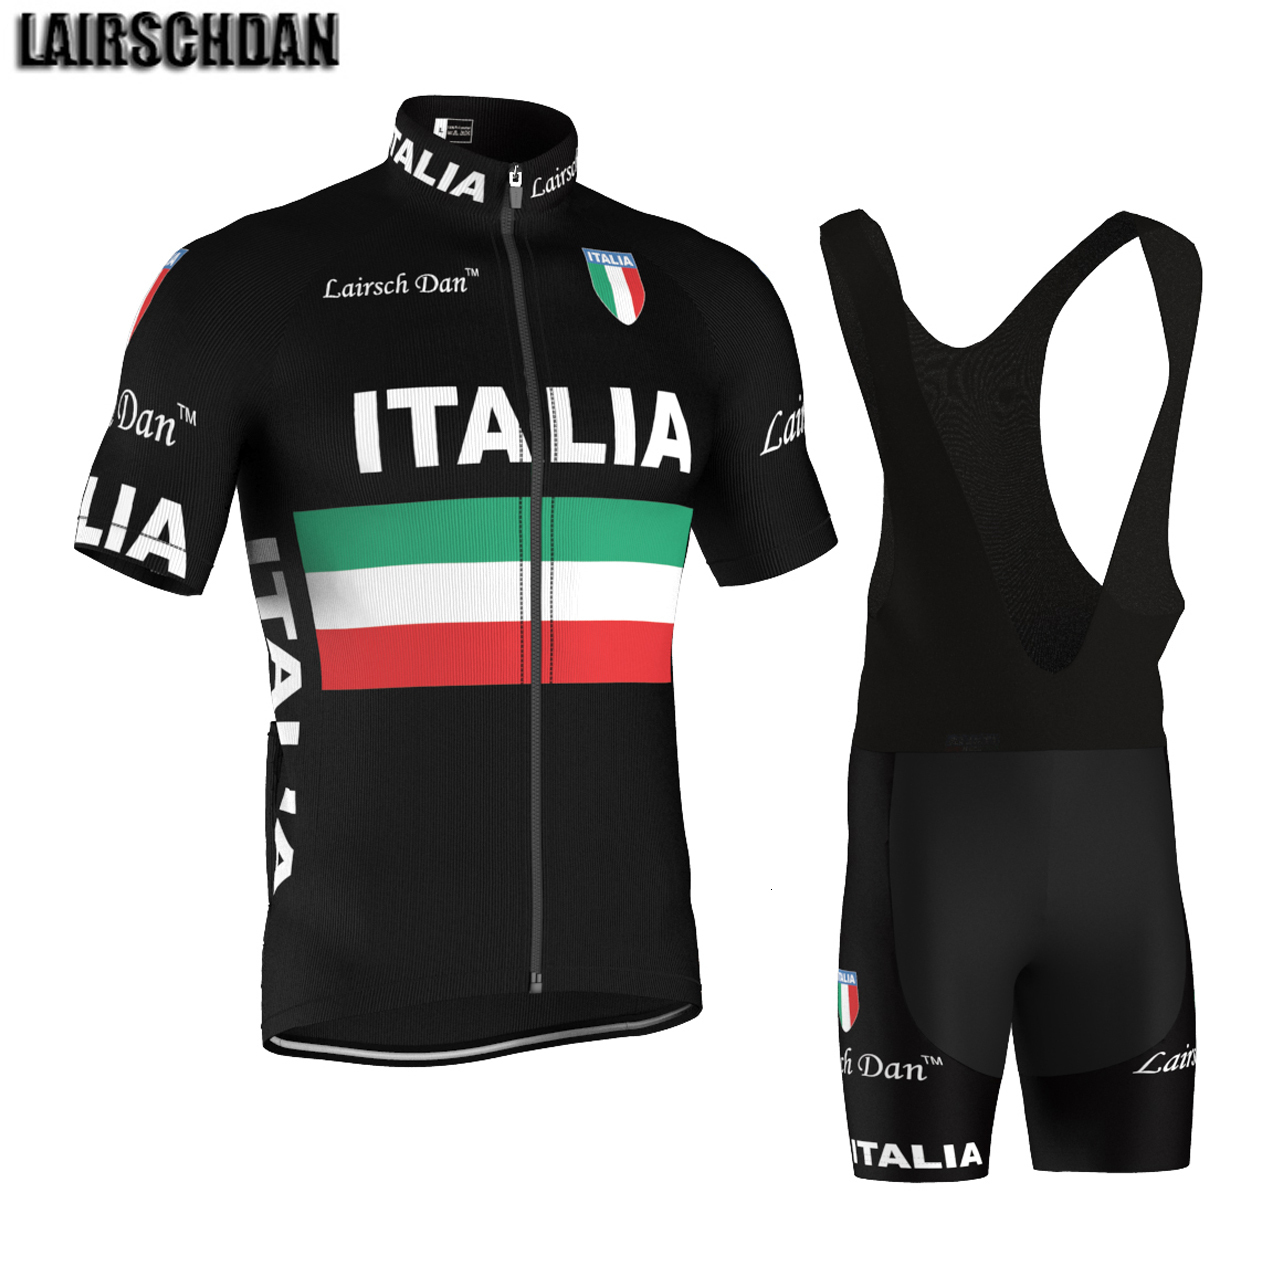 

Cycling Jersey Sets LairschDan Italy Cycling Jersey Set Complete Summer Bicycle Clothes Men Mountain Bike Wear MTB Outfit Maglia Ciclismo Uomo 230619, Only jersey